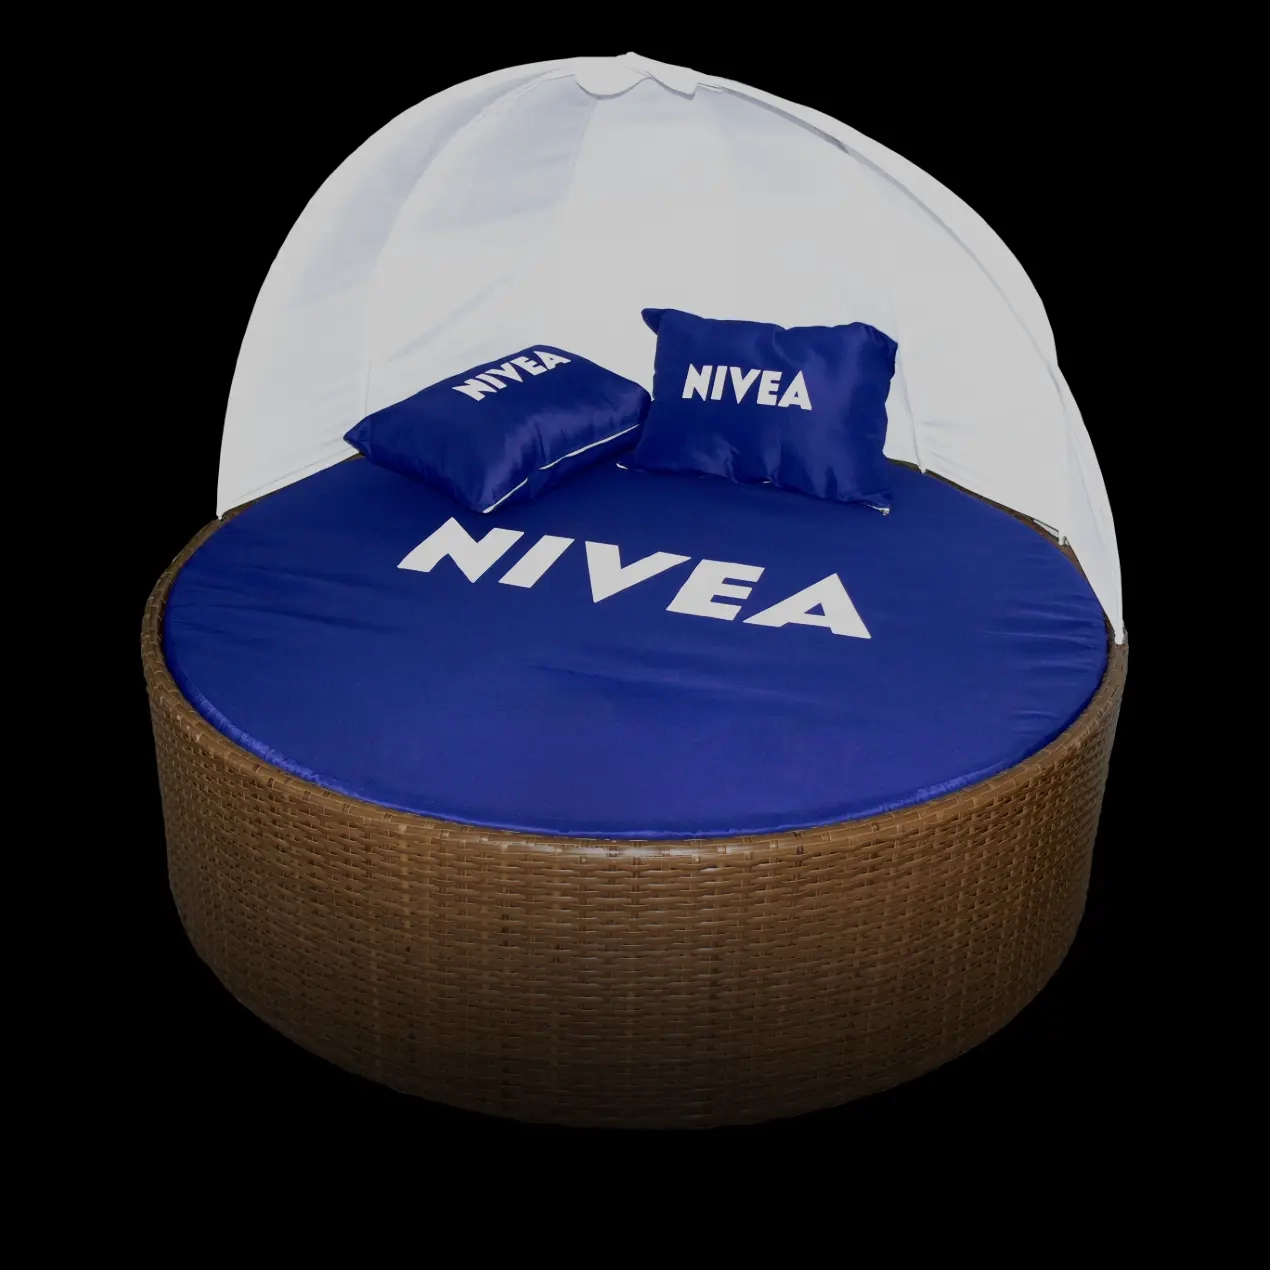 A picture of a 3D product design for NIVEA